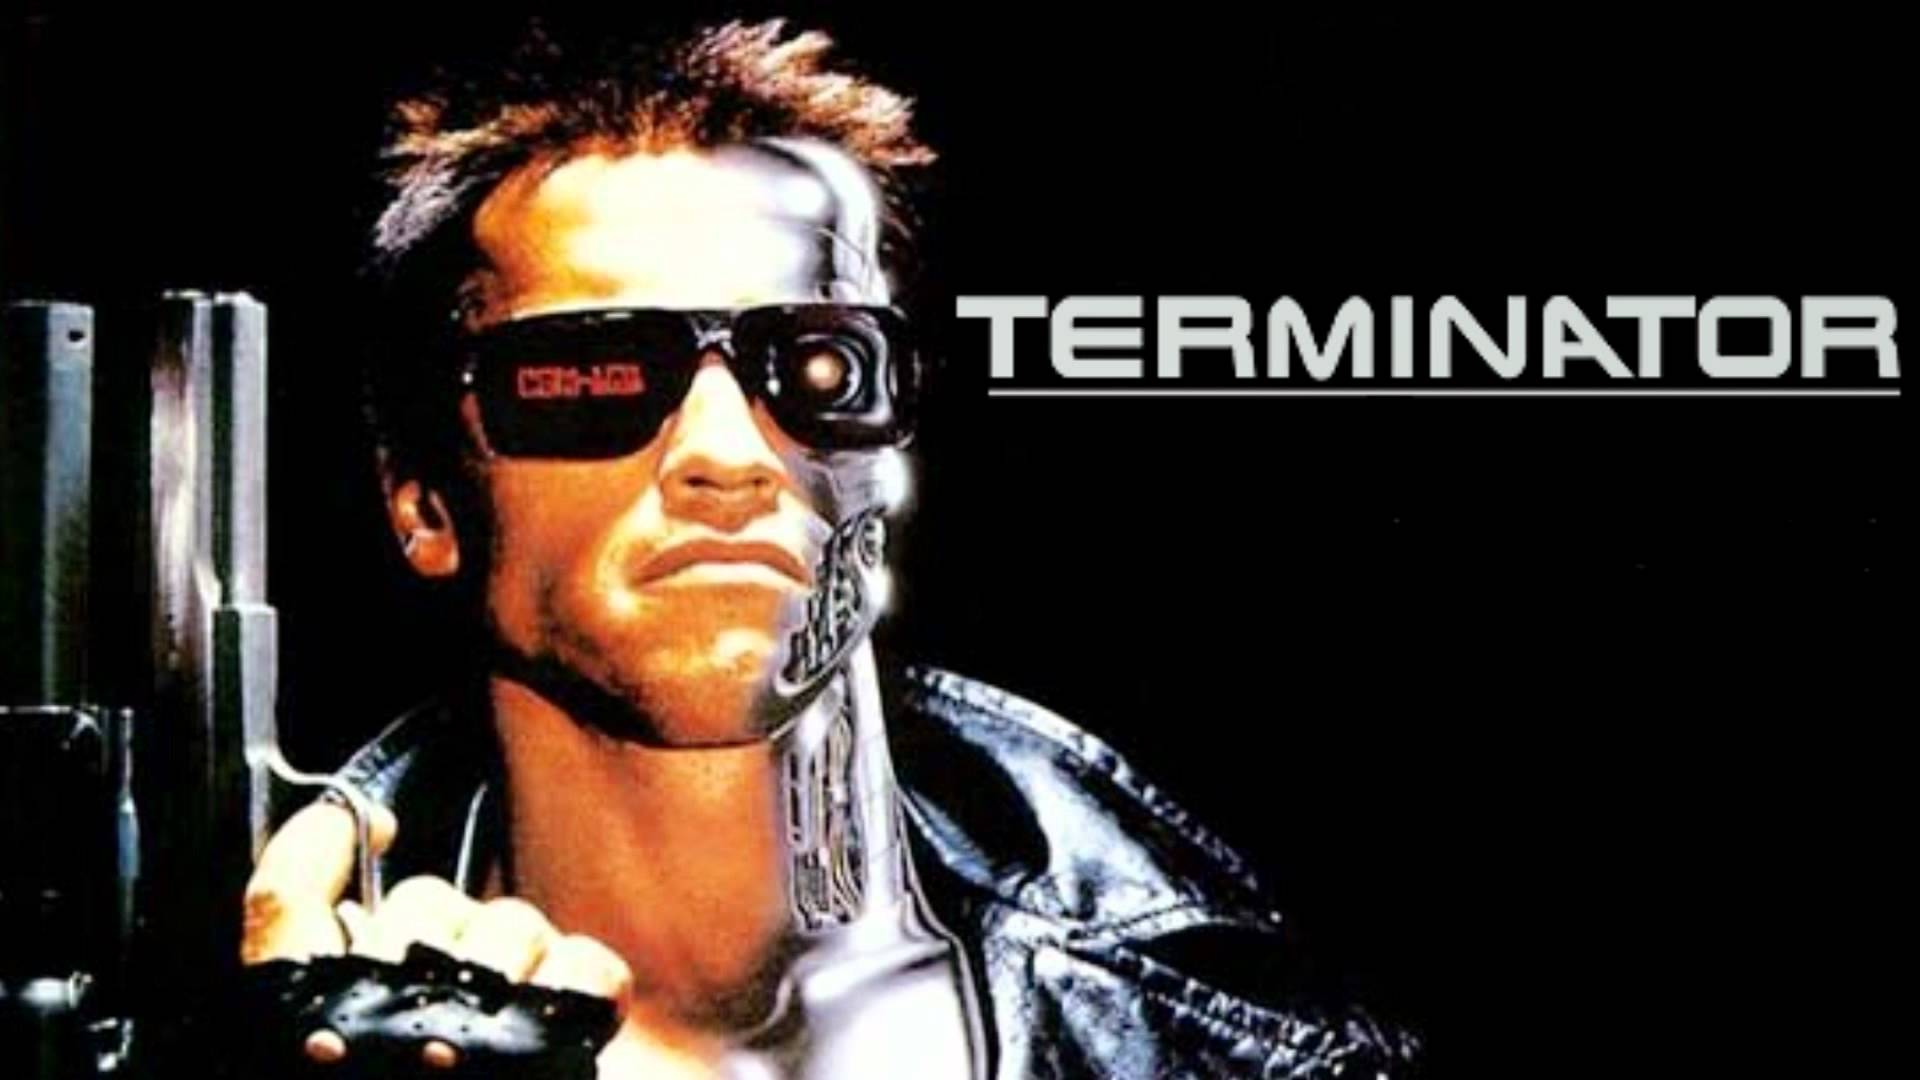 The Terminator Backgrounds, Compatible - PC, Mobile, Gadgets| 1920x1080 px